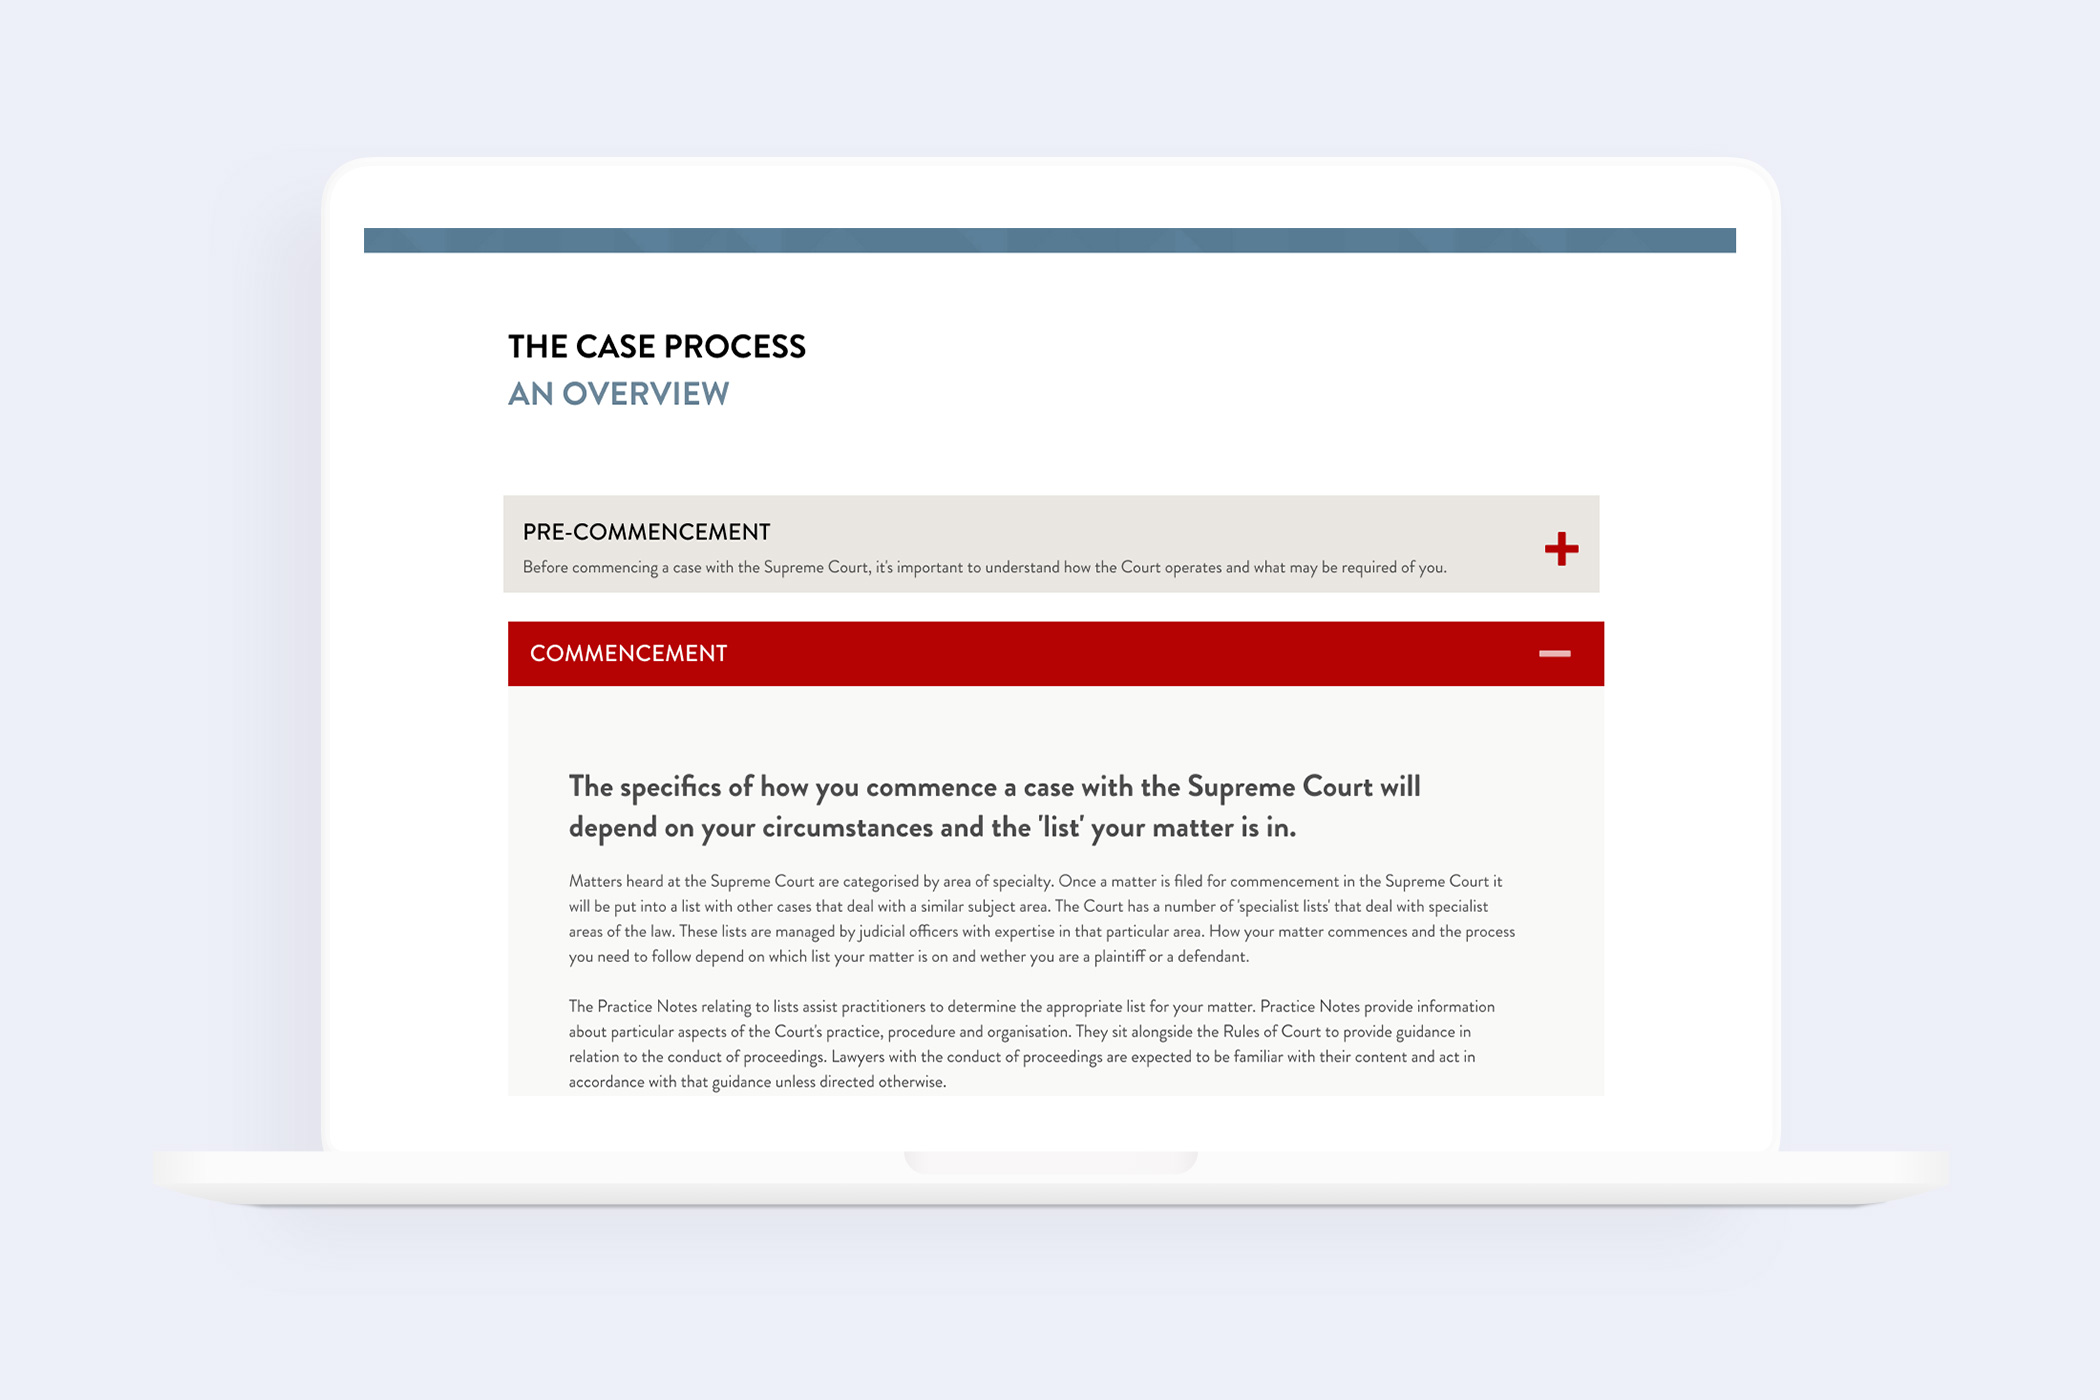 A visual of the Supreme Court website showing the key steps of the case process such as pre-commencement and commencement together with supporting content for users.